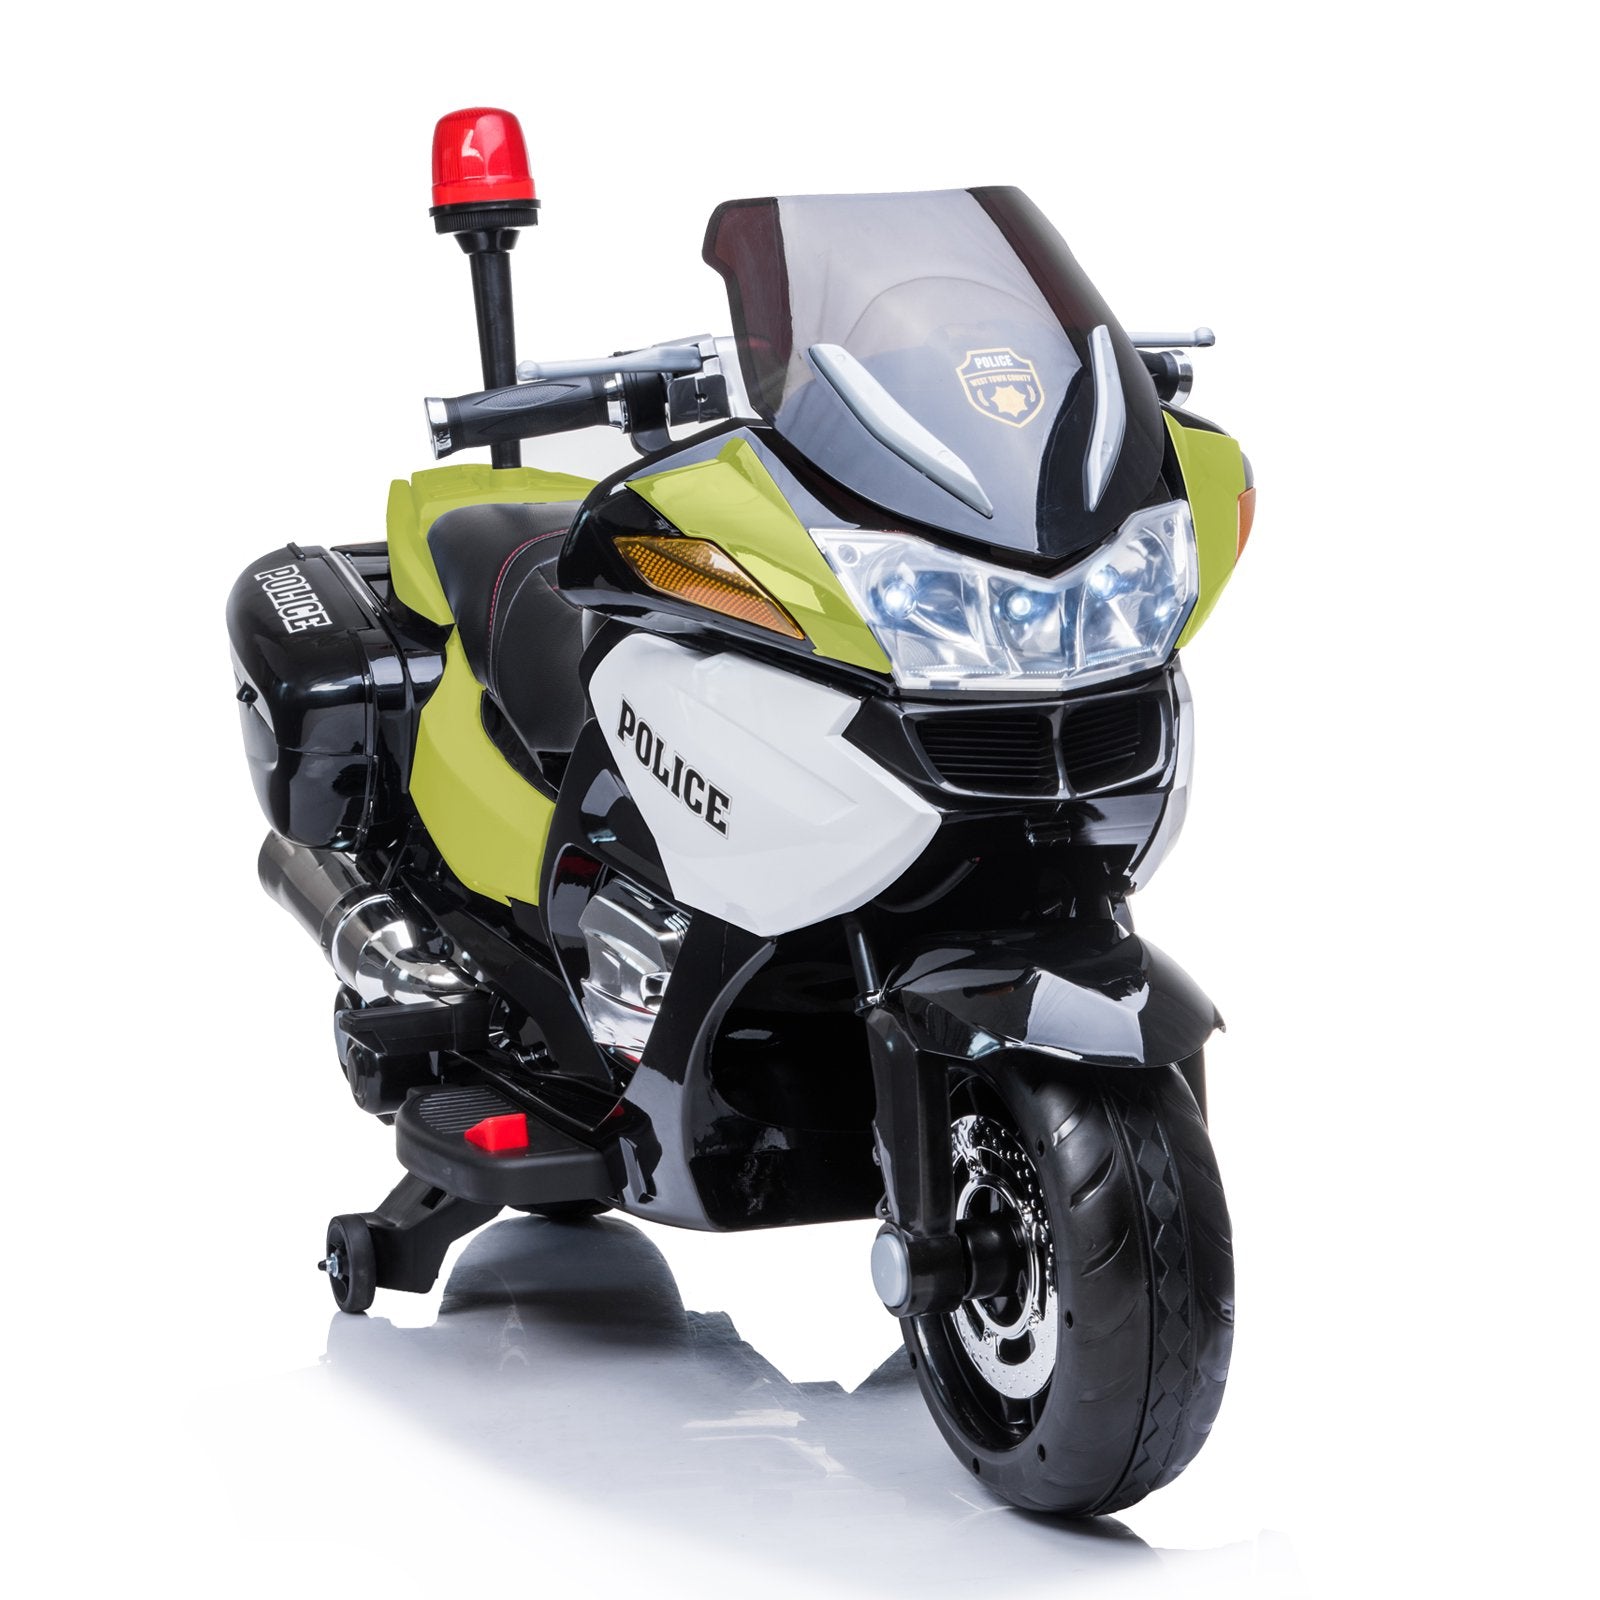 2023 Honda ST1300 Style Police Motorbike | 1 Seater > 24V (1x1) | Electric Riding Vehicle for Kids